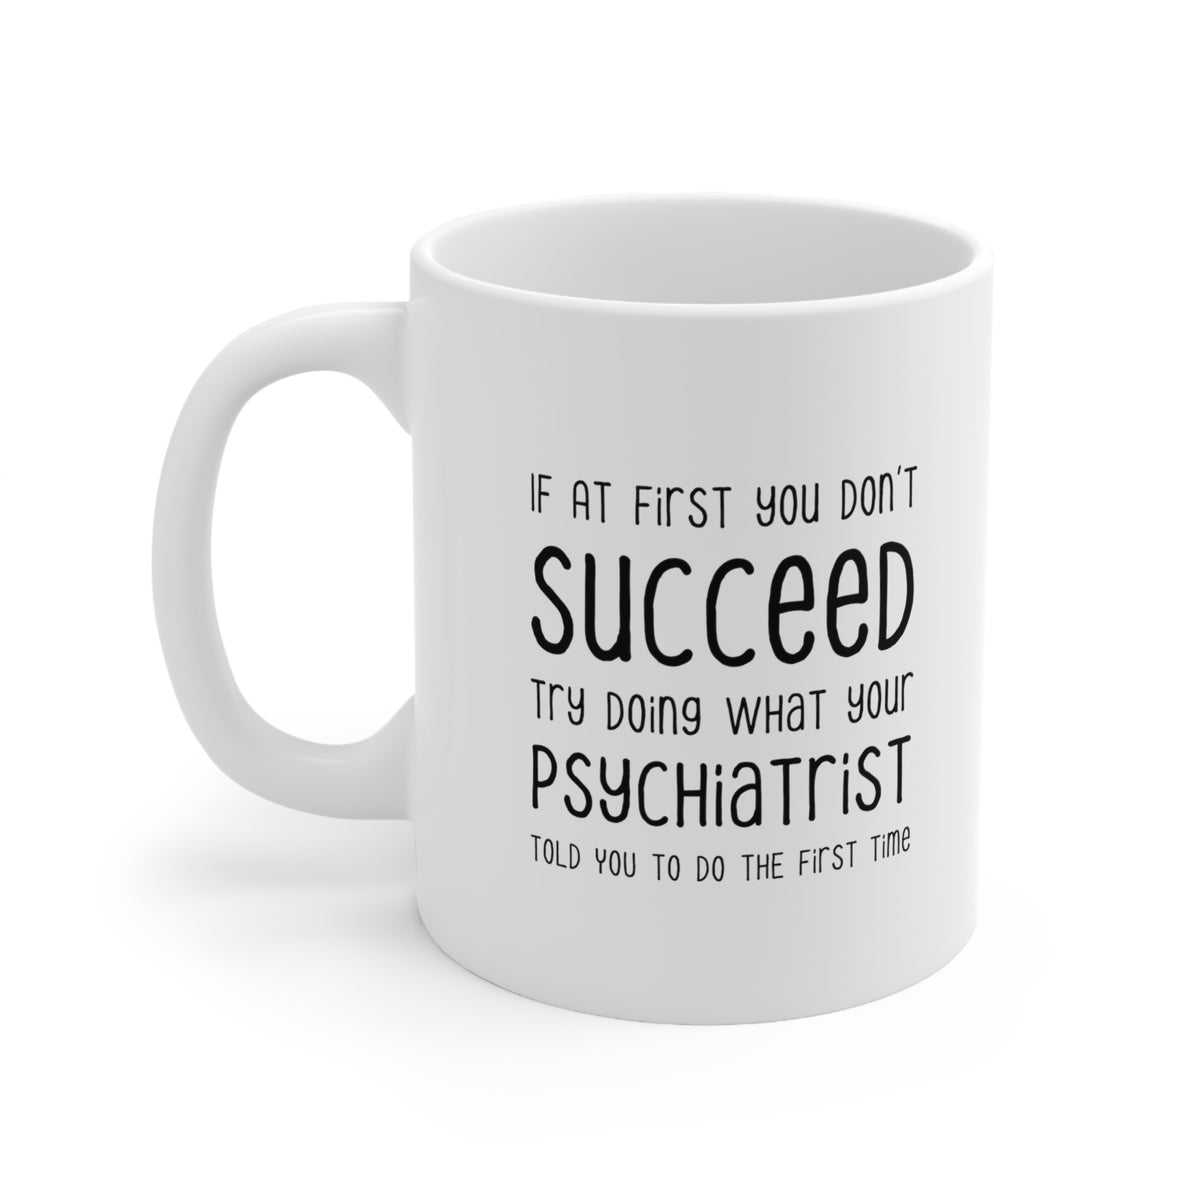 Psychiatrist Coffee Mug - Doing What Your Psychiatrist Told You - Funny Sarcasm Gifts for Men and Women